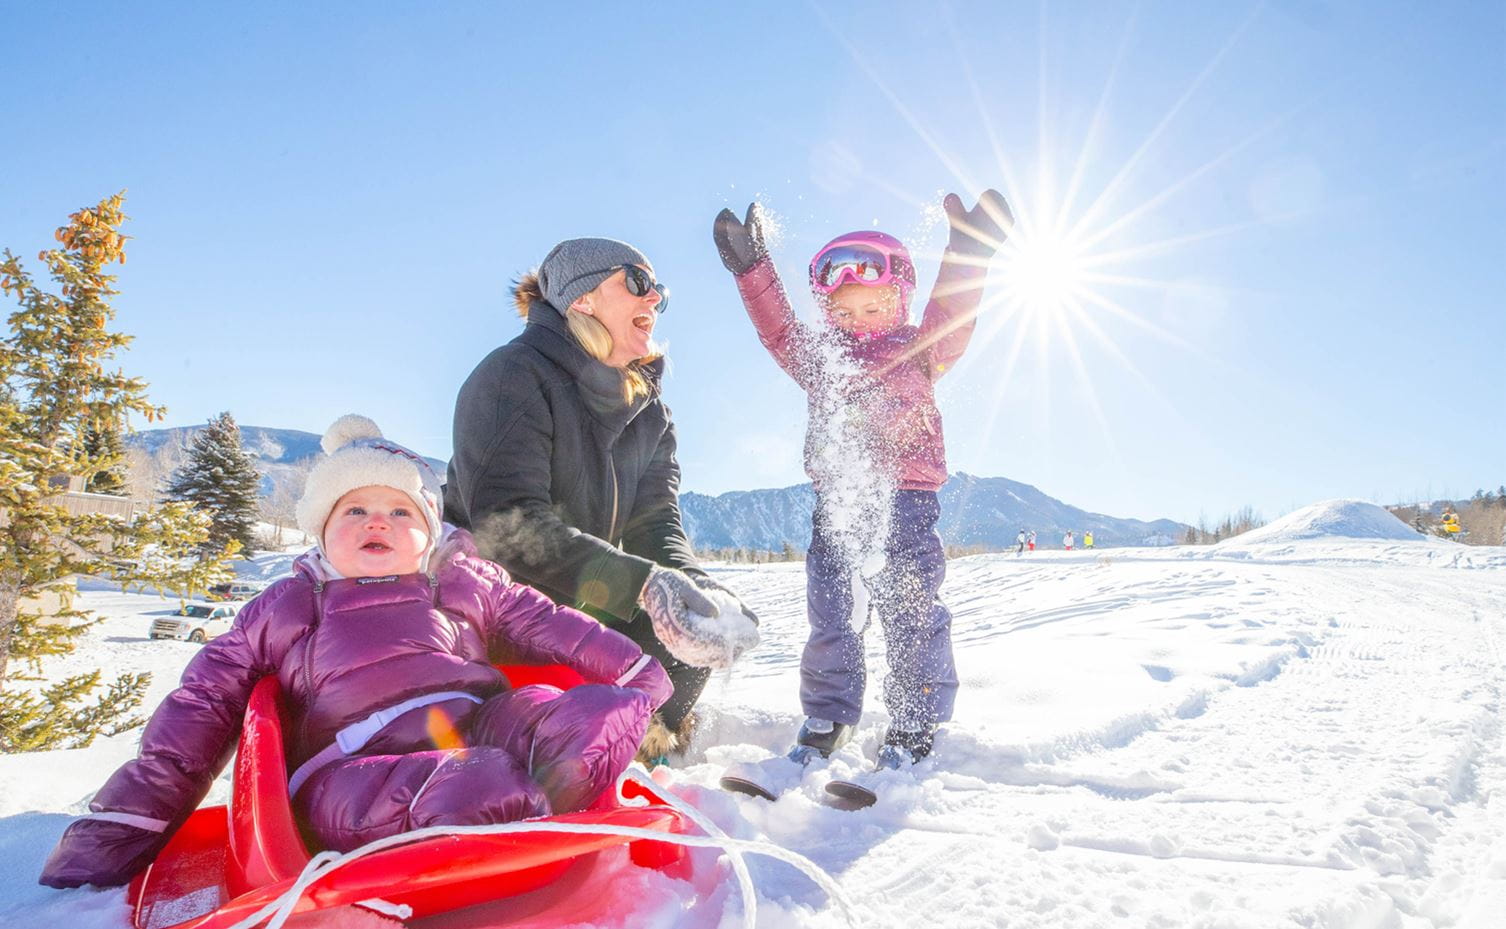 Kids loving their time at Aspen Snowmass in winter